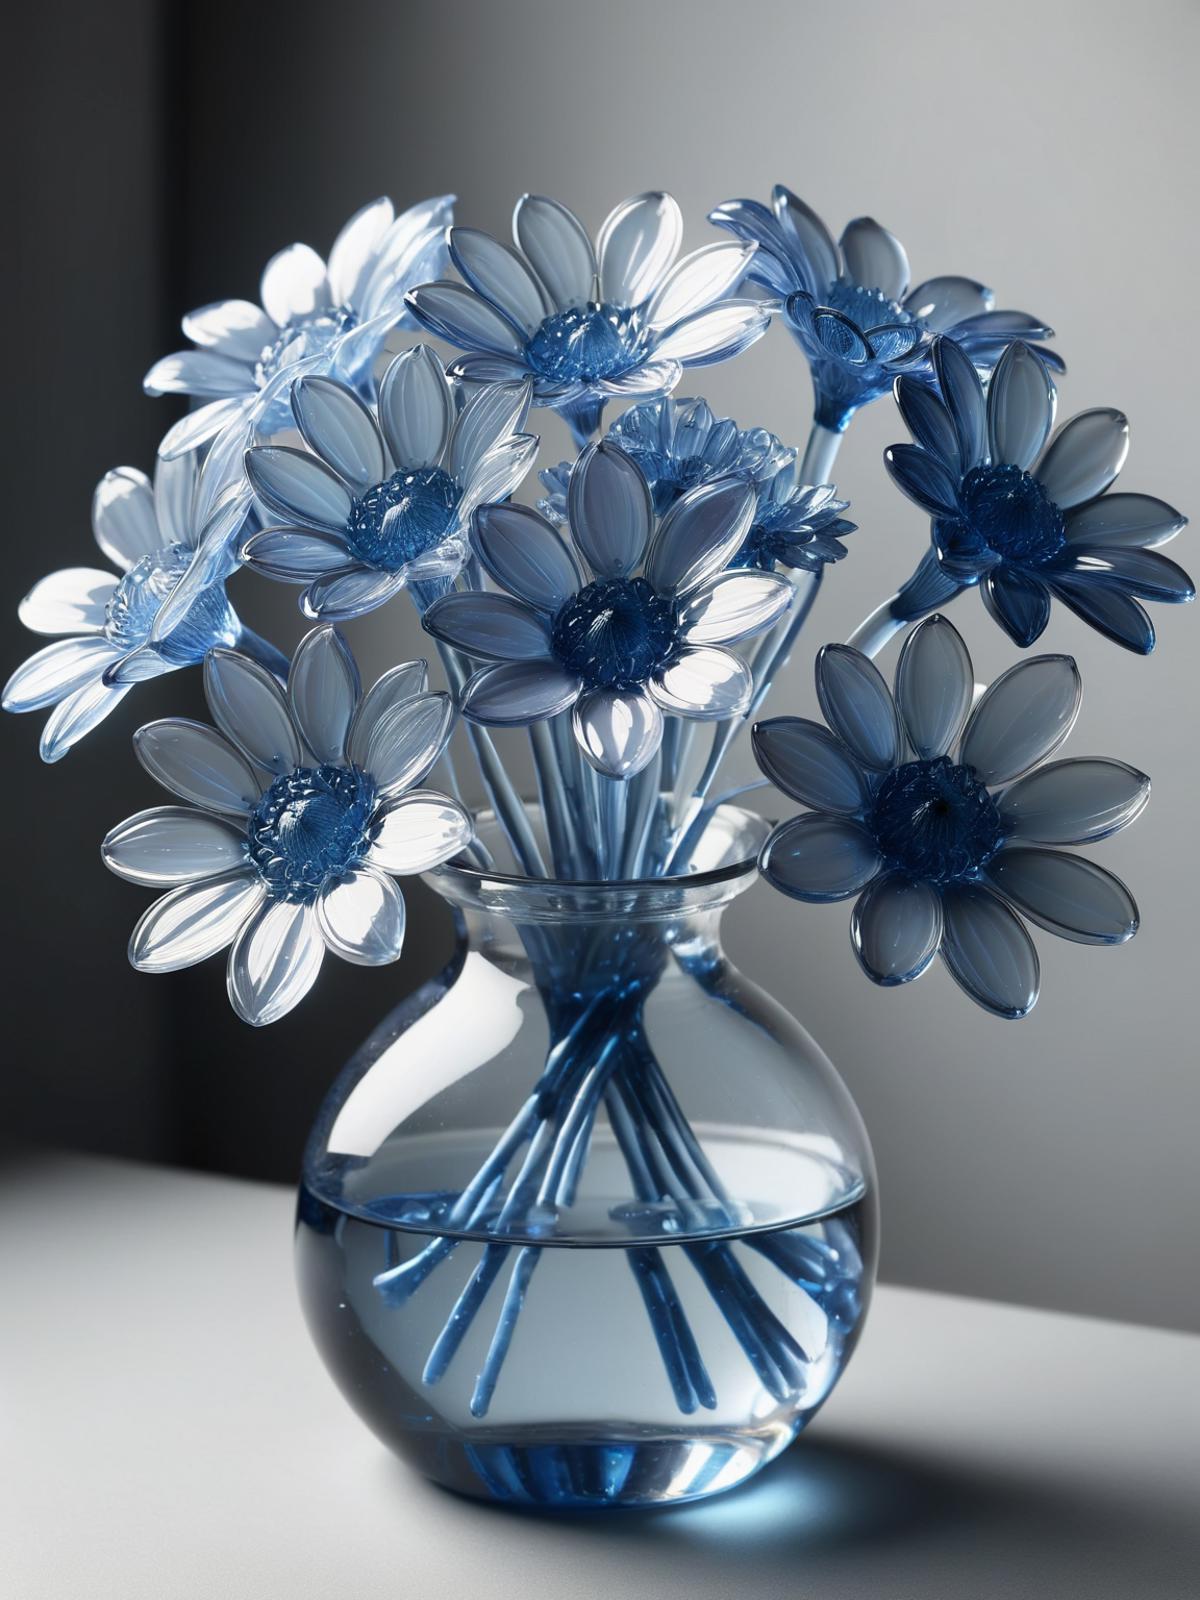 A vase with a bouquet of blue glass flowers.